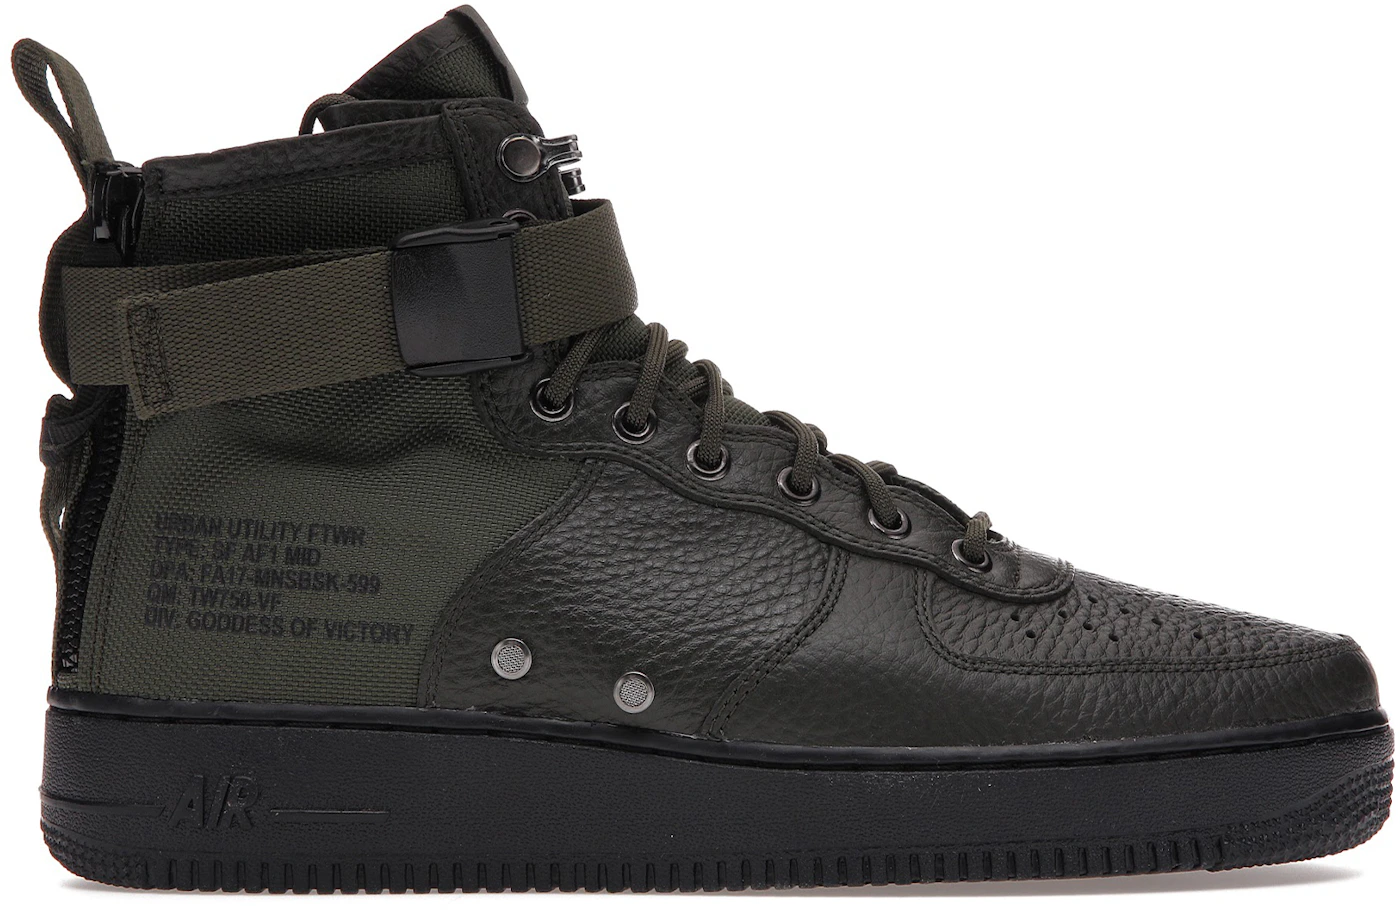 Nike Air Force 1 SF AF1 Mid Goddess Of Victory Shoes Women’s 9